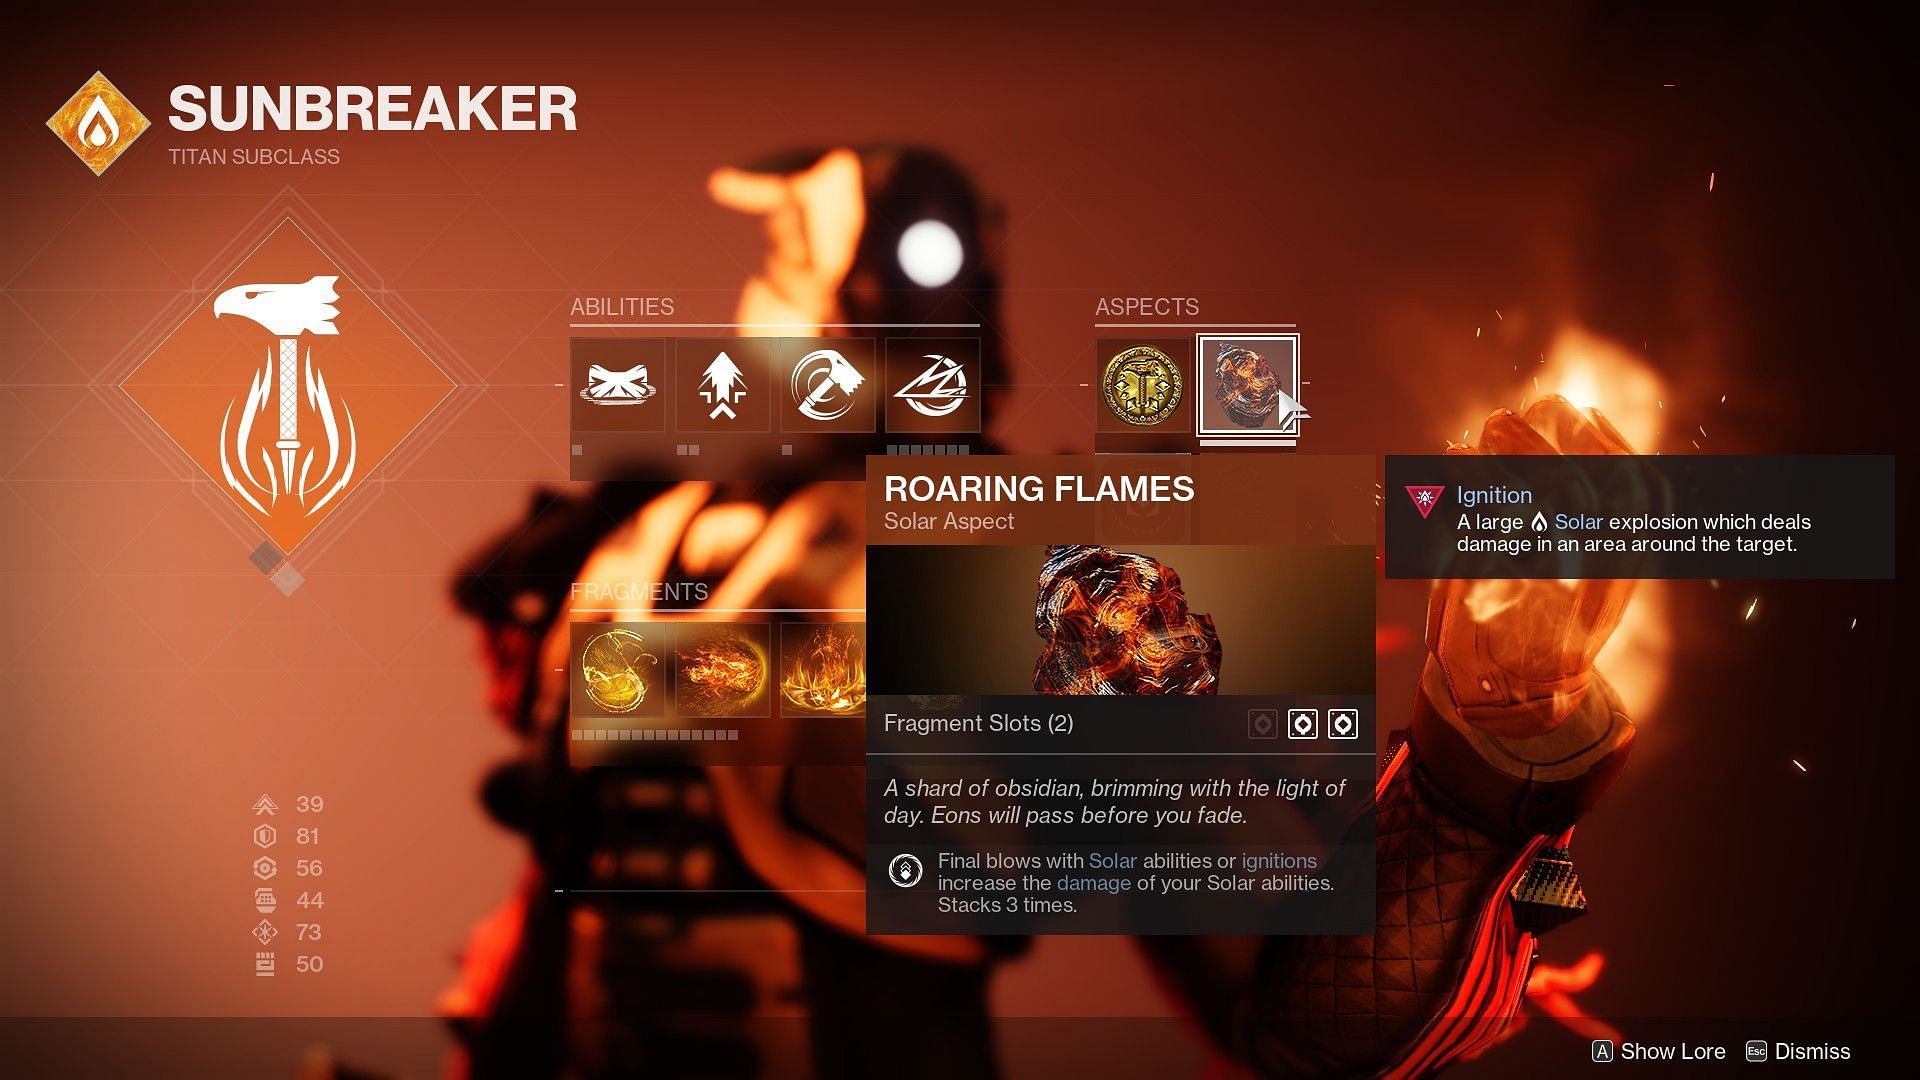 Roaring Flames Aspect for more damage with your hammers (Image via Destiny 2)